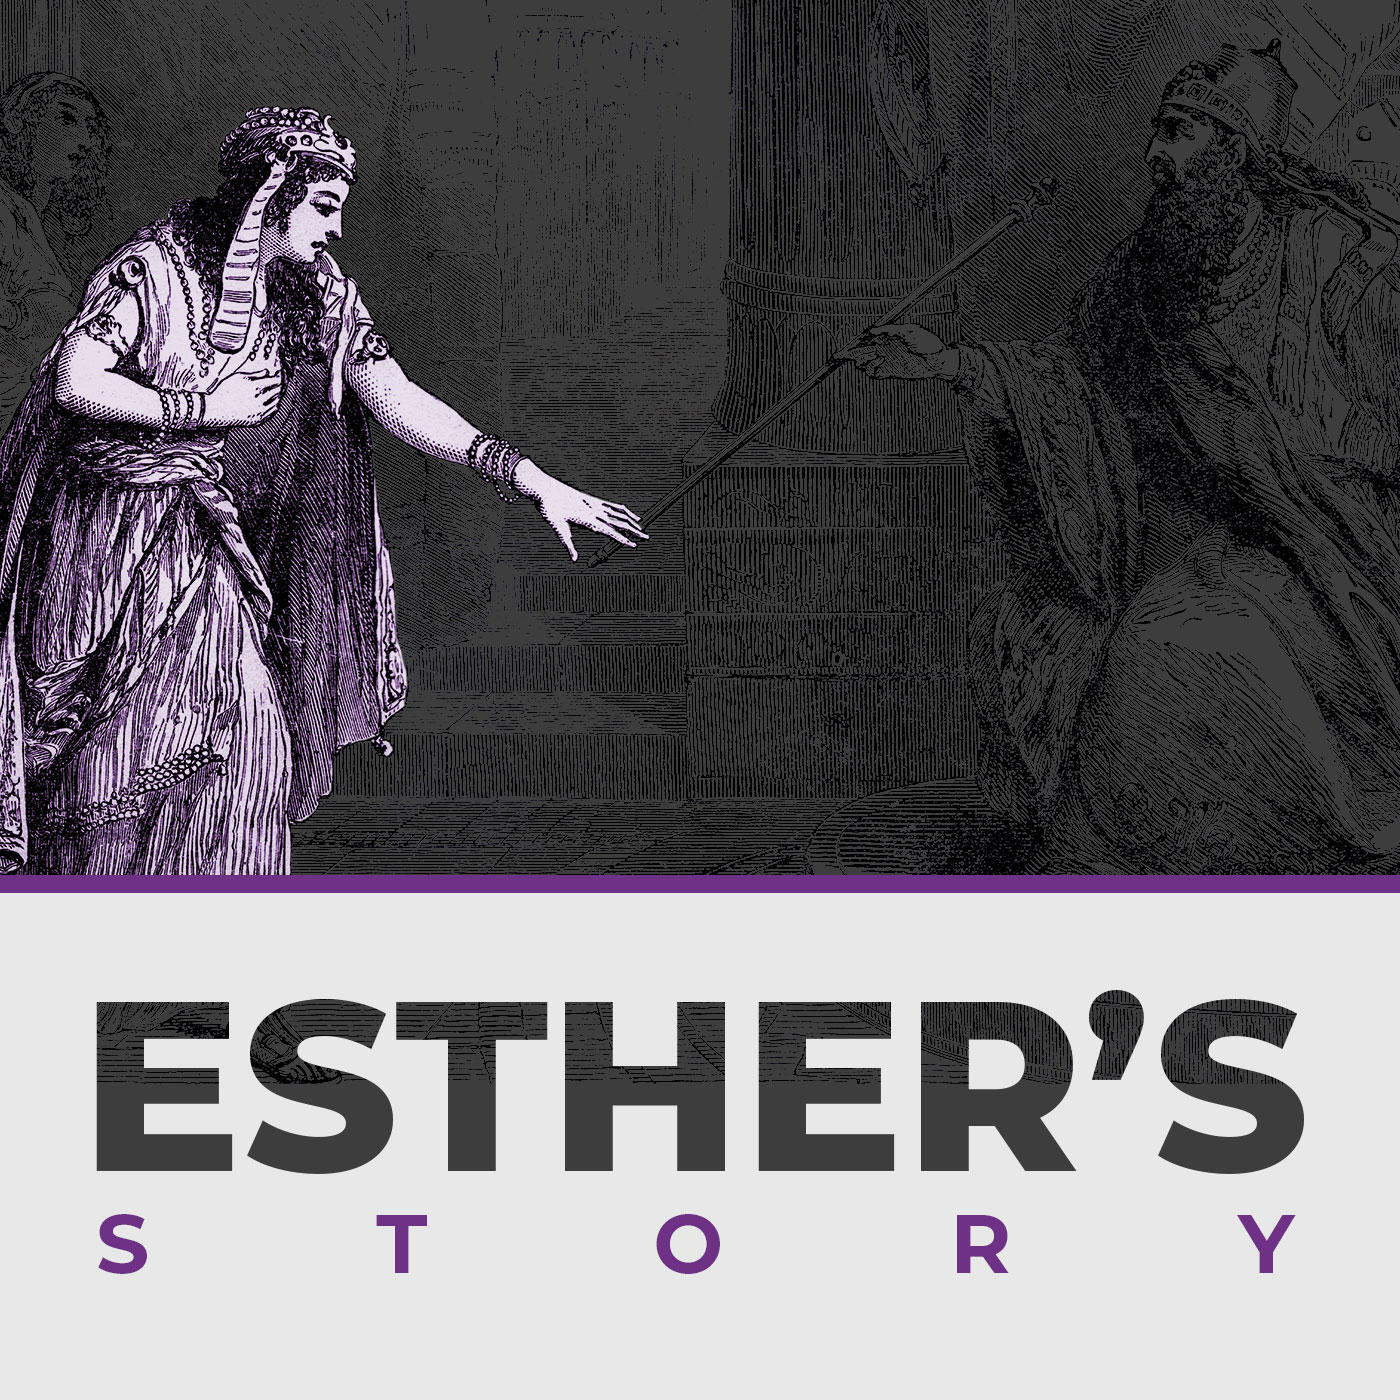 Esther's Story